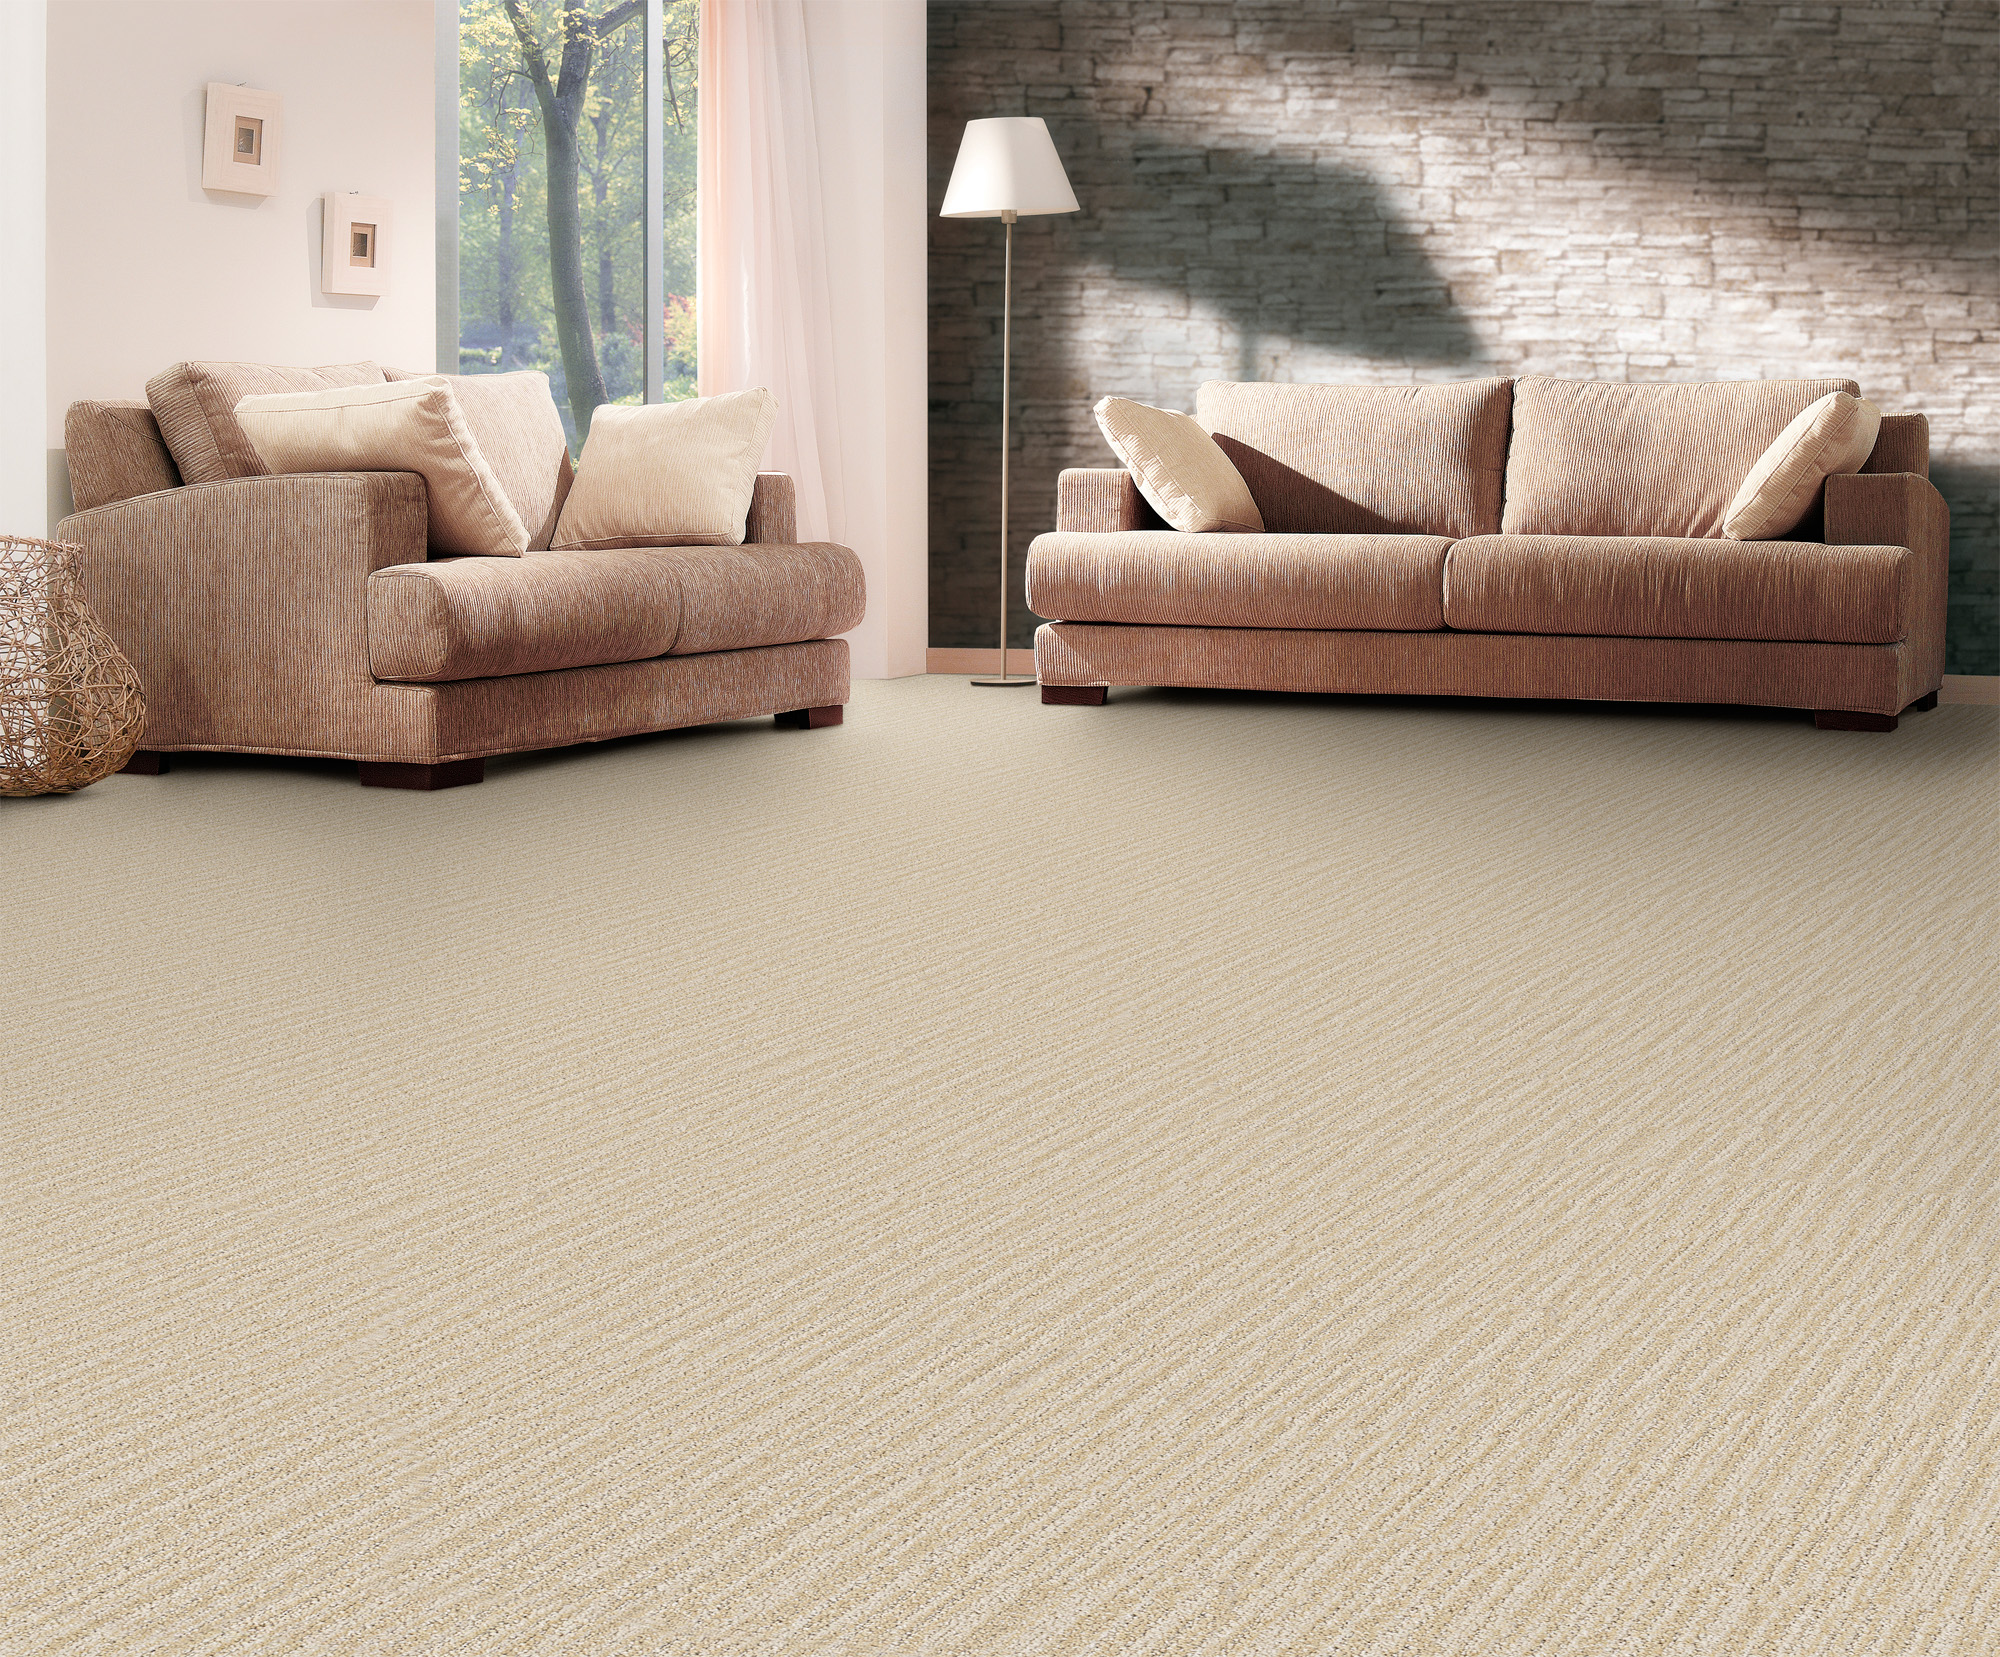 Find out how to Make Others Jealous Of Your Clean Carpets 1